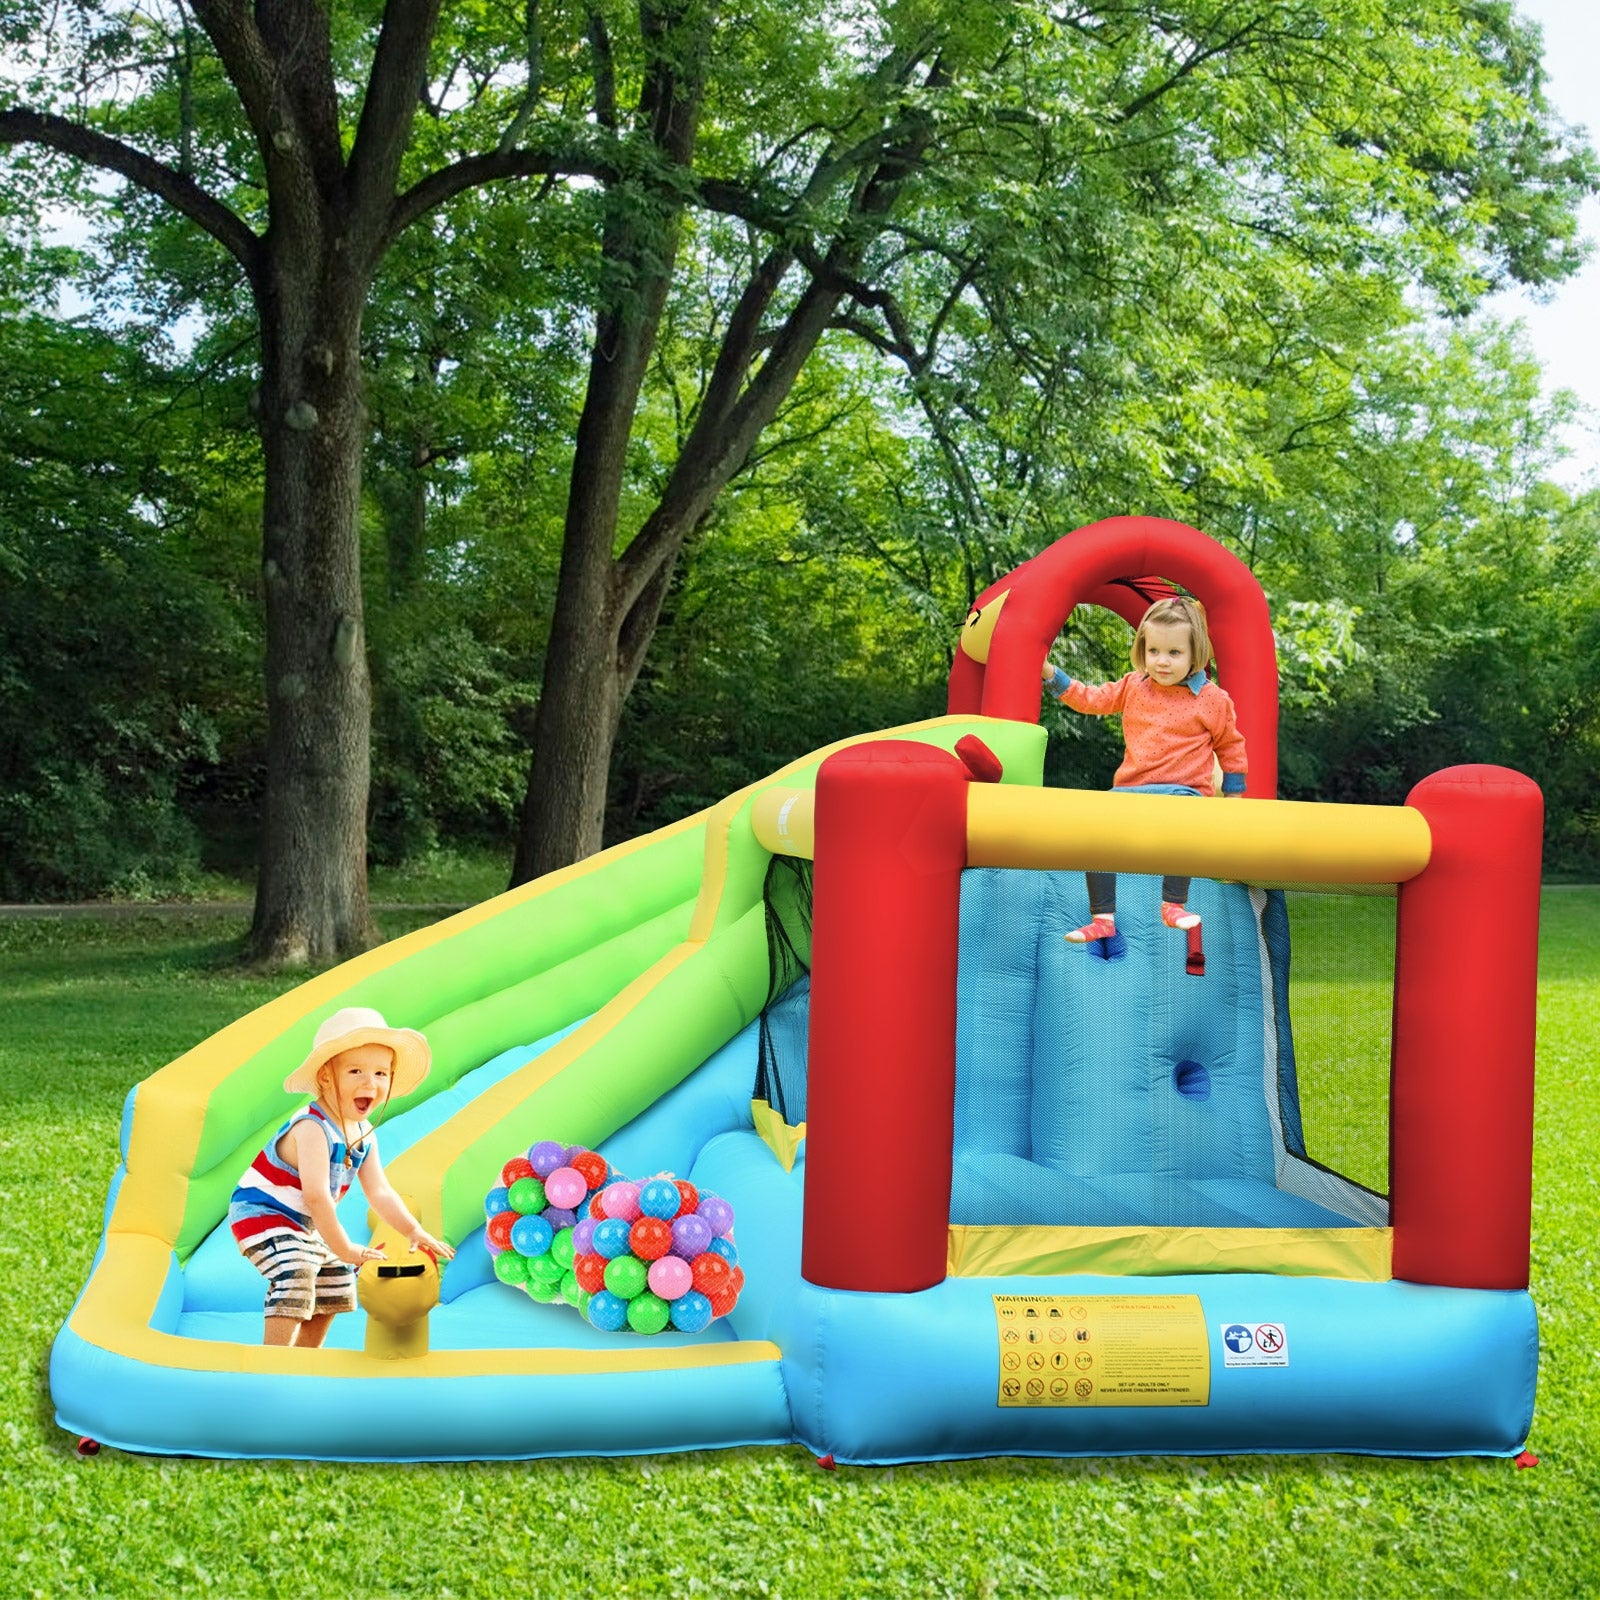 6-in-1 Inflatable Water Slide Bounce House & Jumping Castle Water Park without Blower